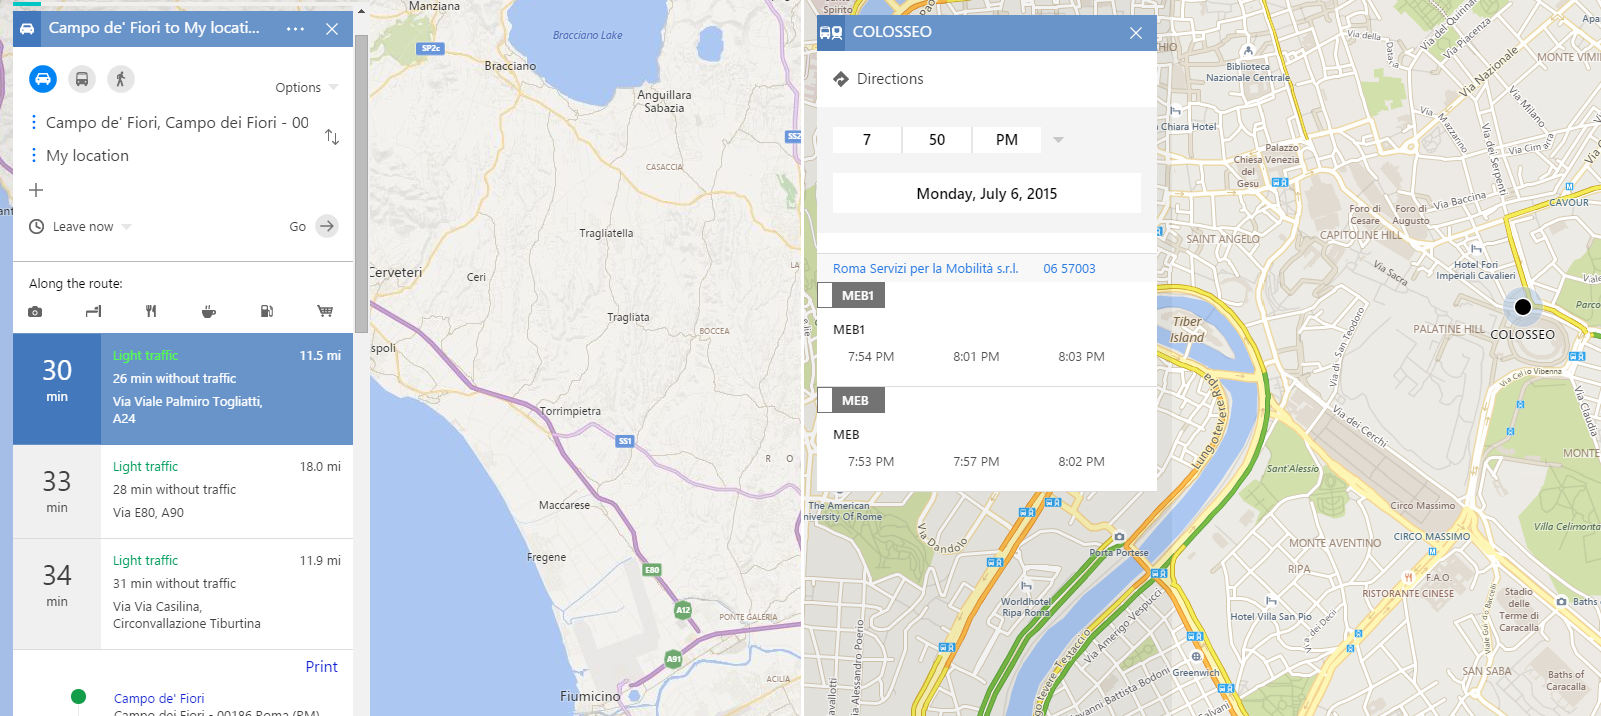 bing_maps_preview